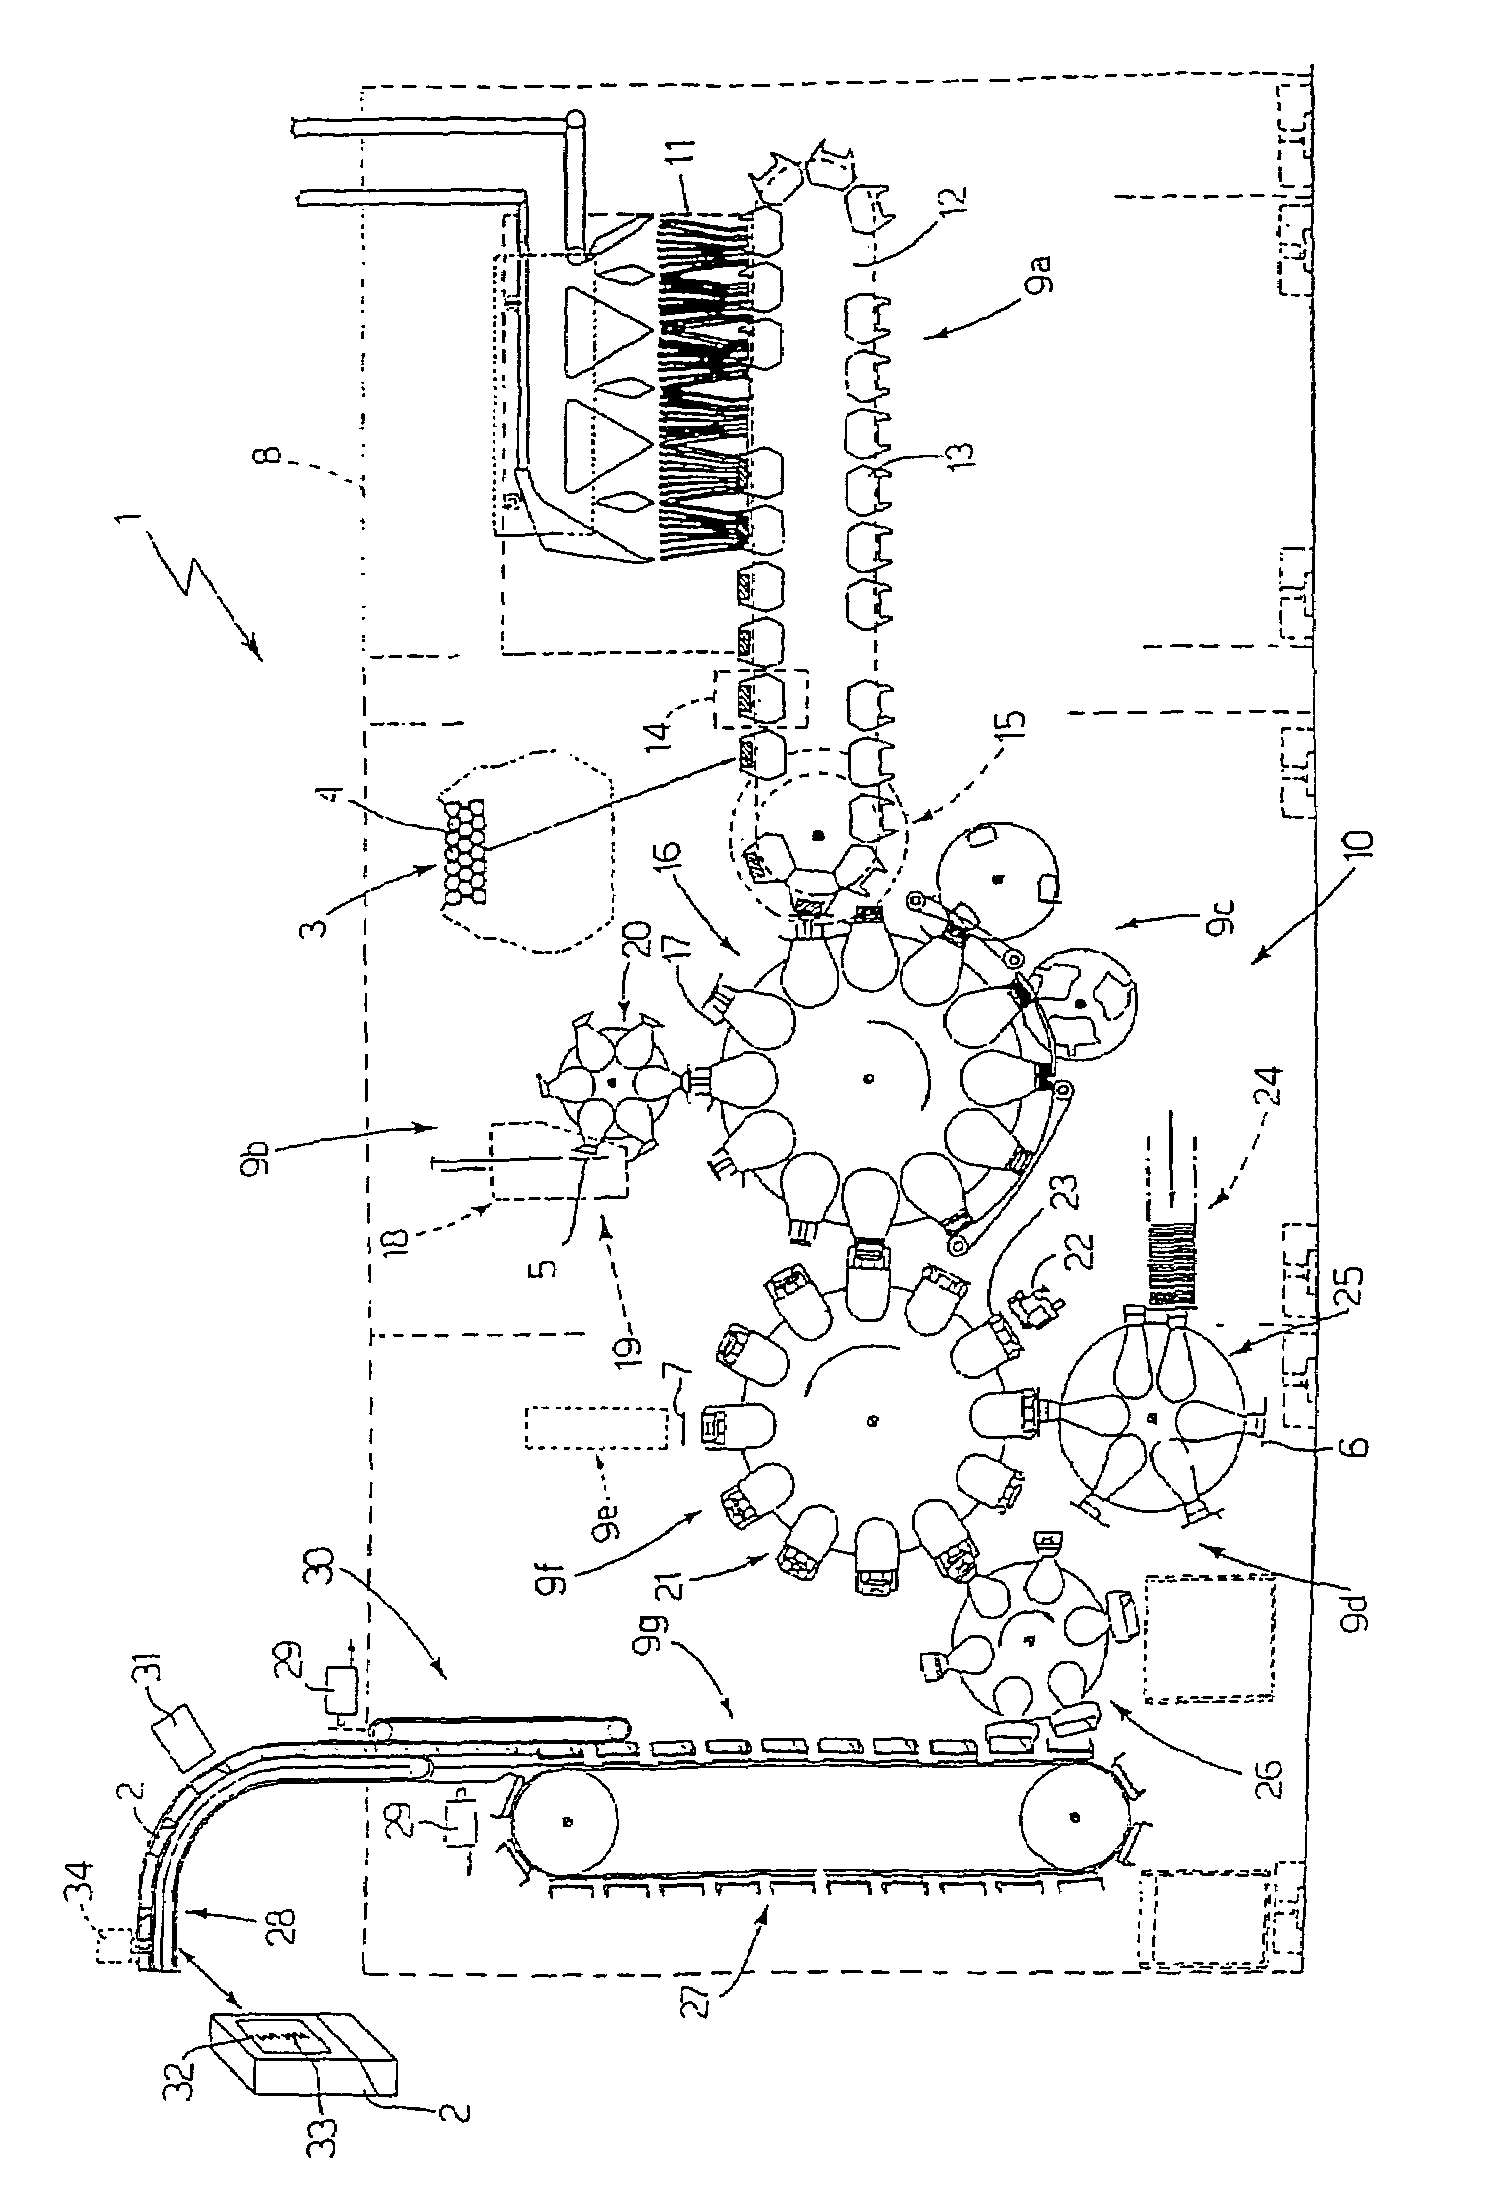 Method of making a brand change on an automatic production system for processing tobacco articles